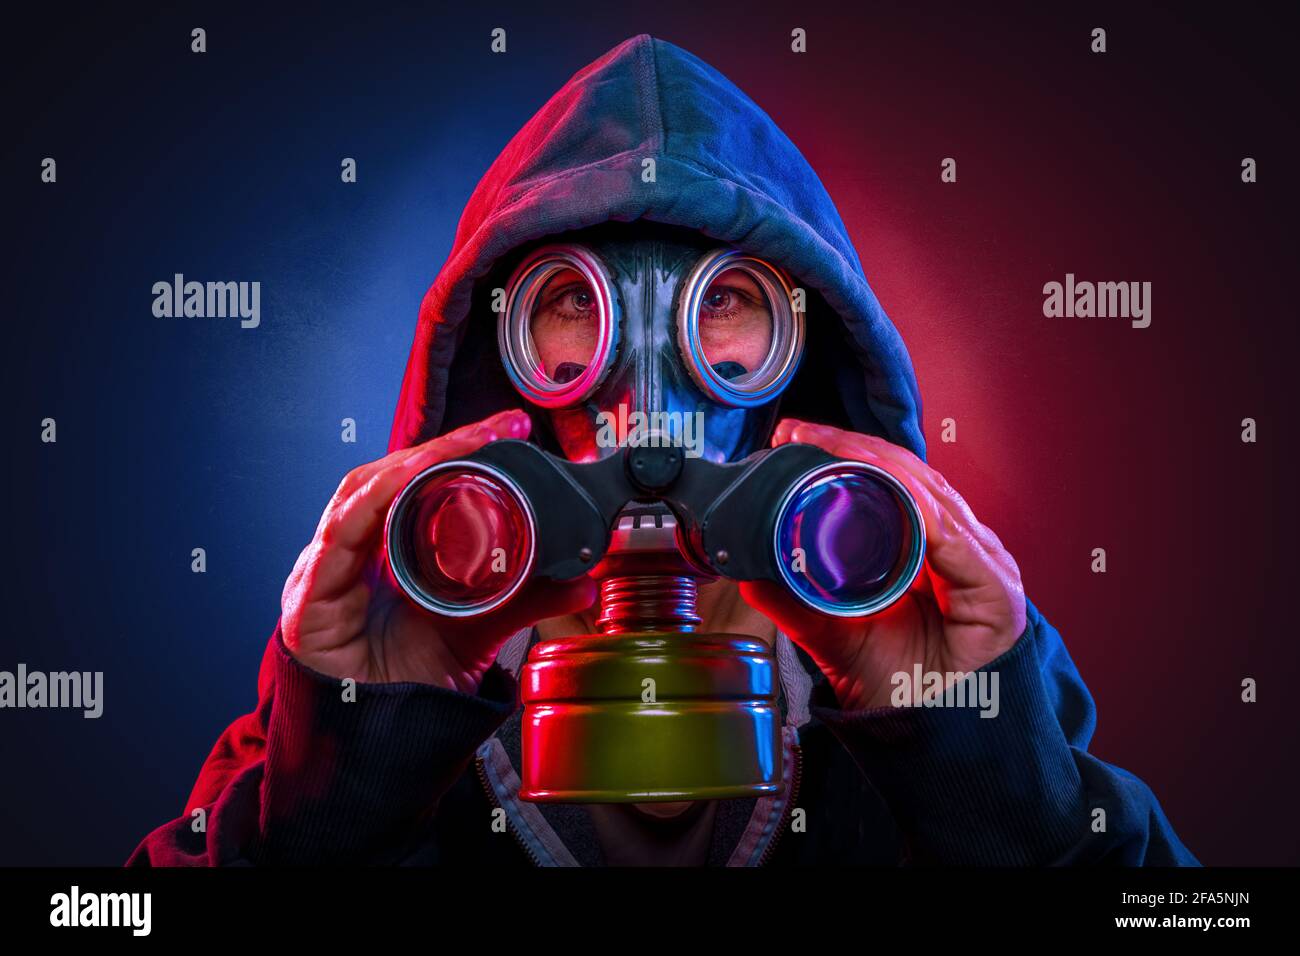 masked person using a spyglass Stock Photo